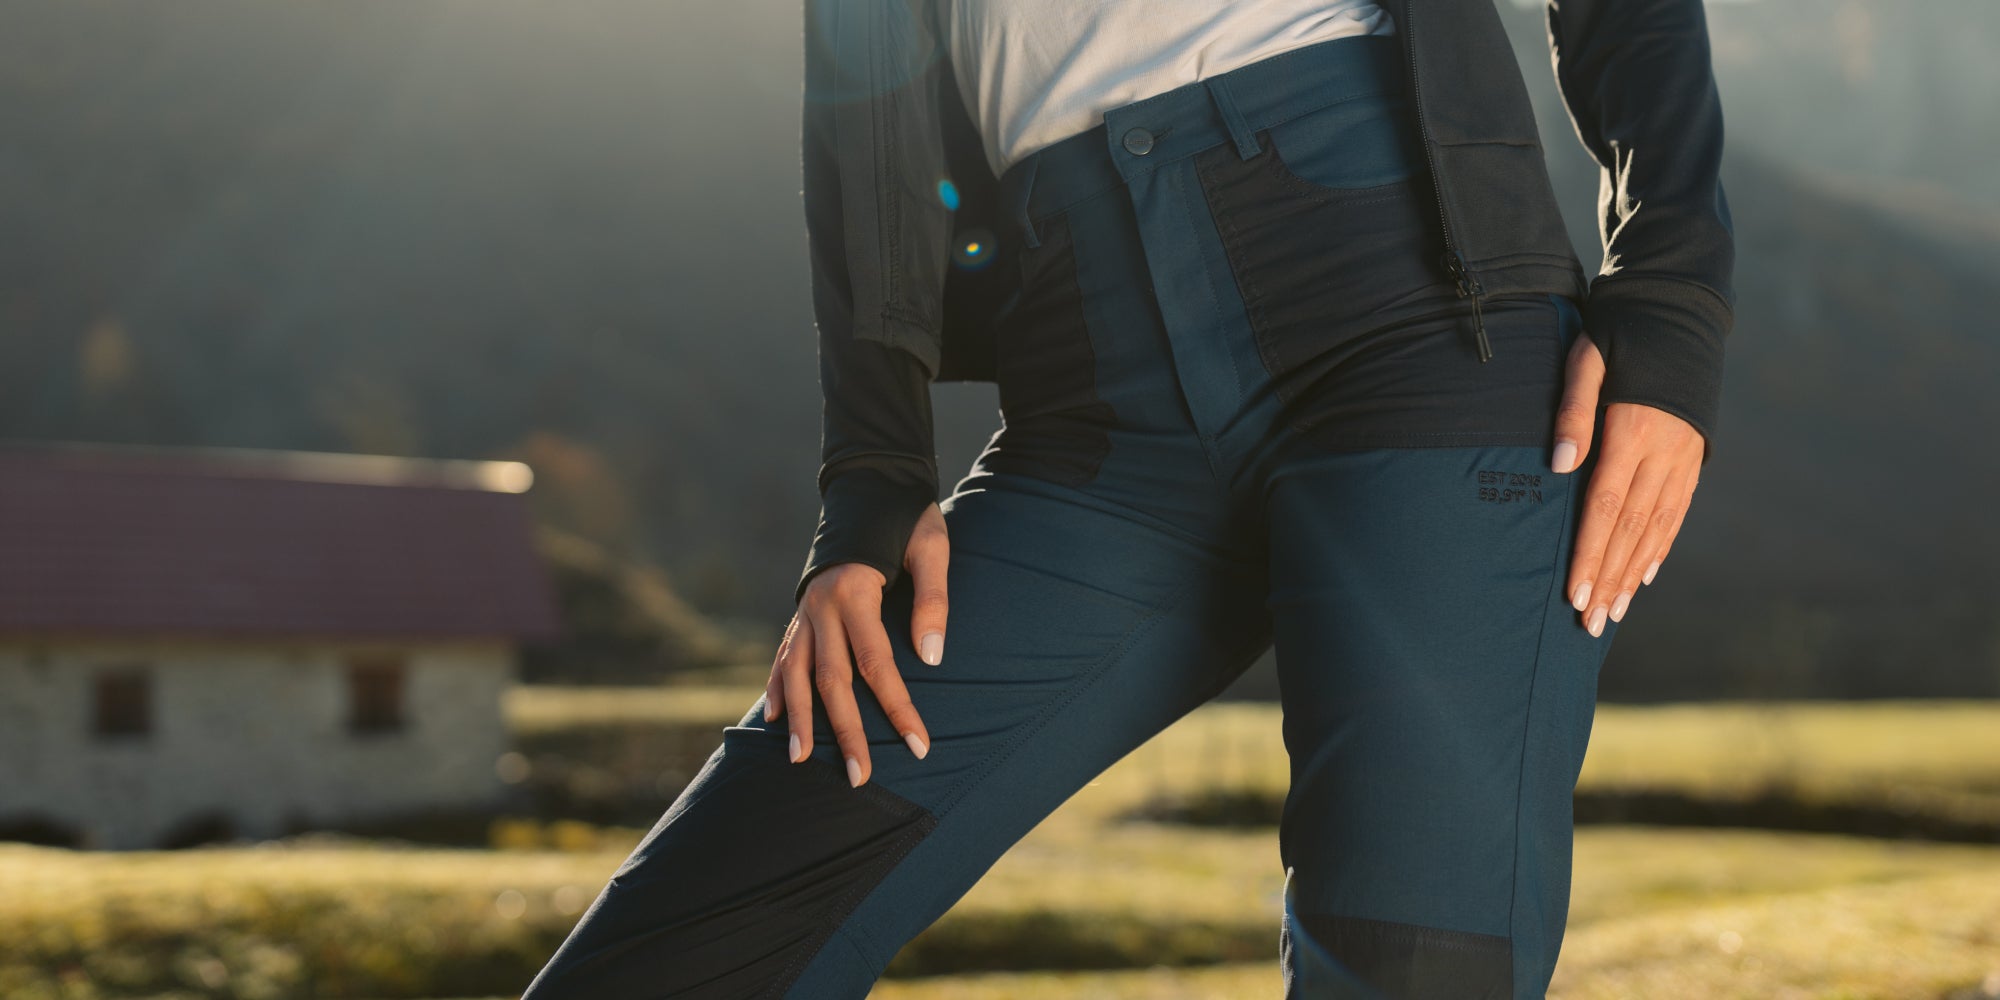 Women's outdoor pants | High waist and stretchy | Astrid Wild